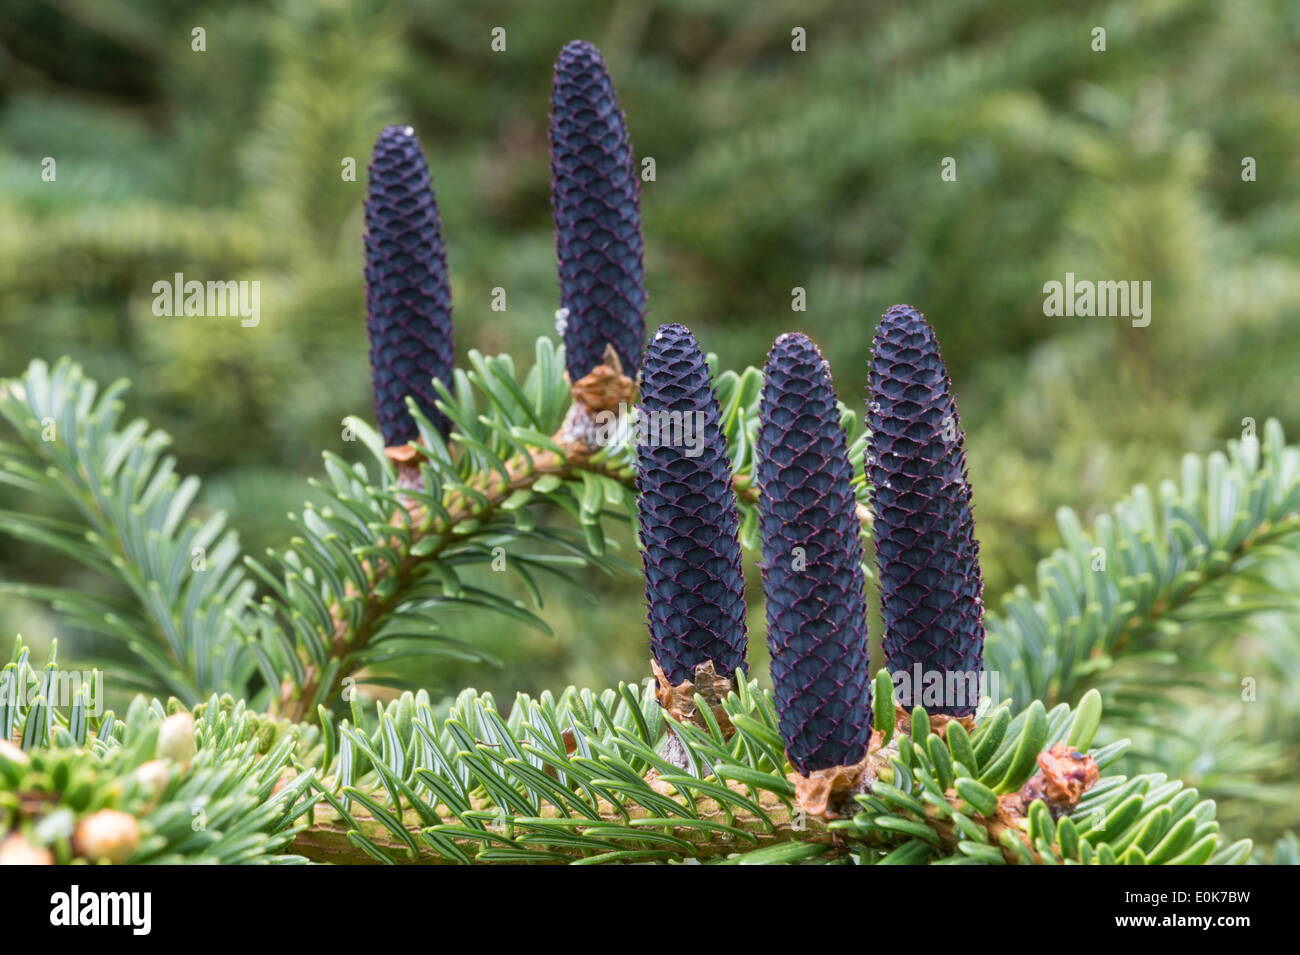 Forrest fir (Abies forrestii var. georgei) native to China Yorkshire Arboretum Kew at Castle Howard North Yorkshire England May Stock Photo